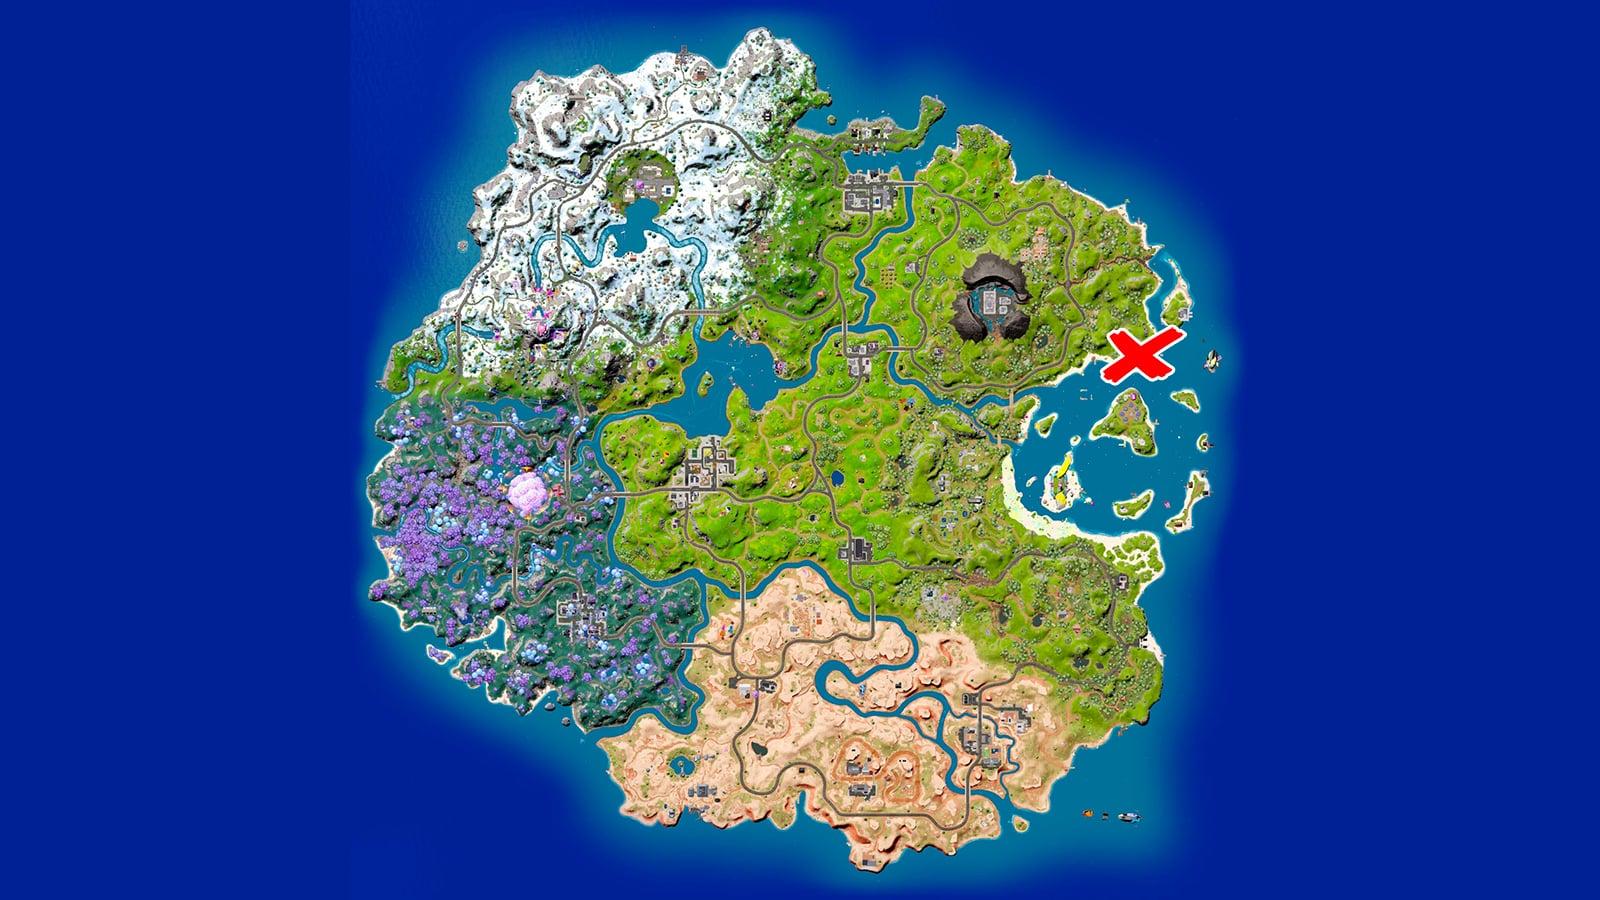 The Ruins location marked on the Fortnite map